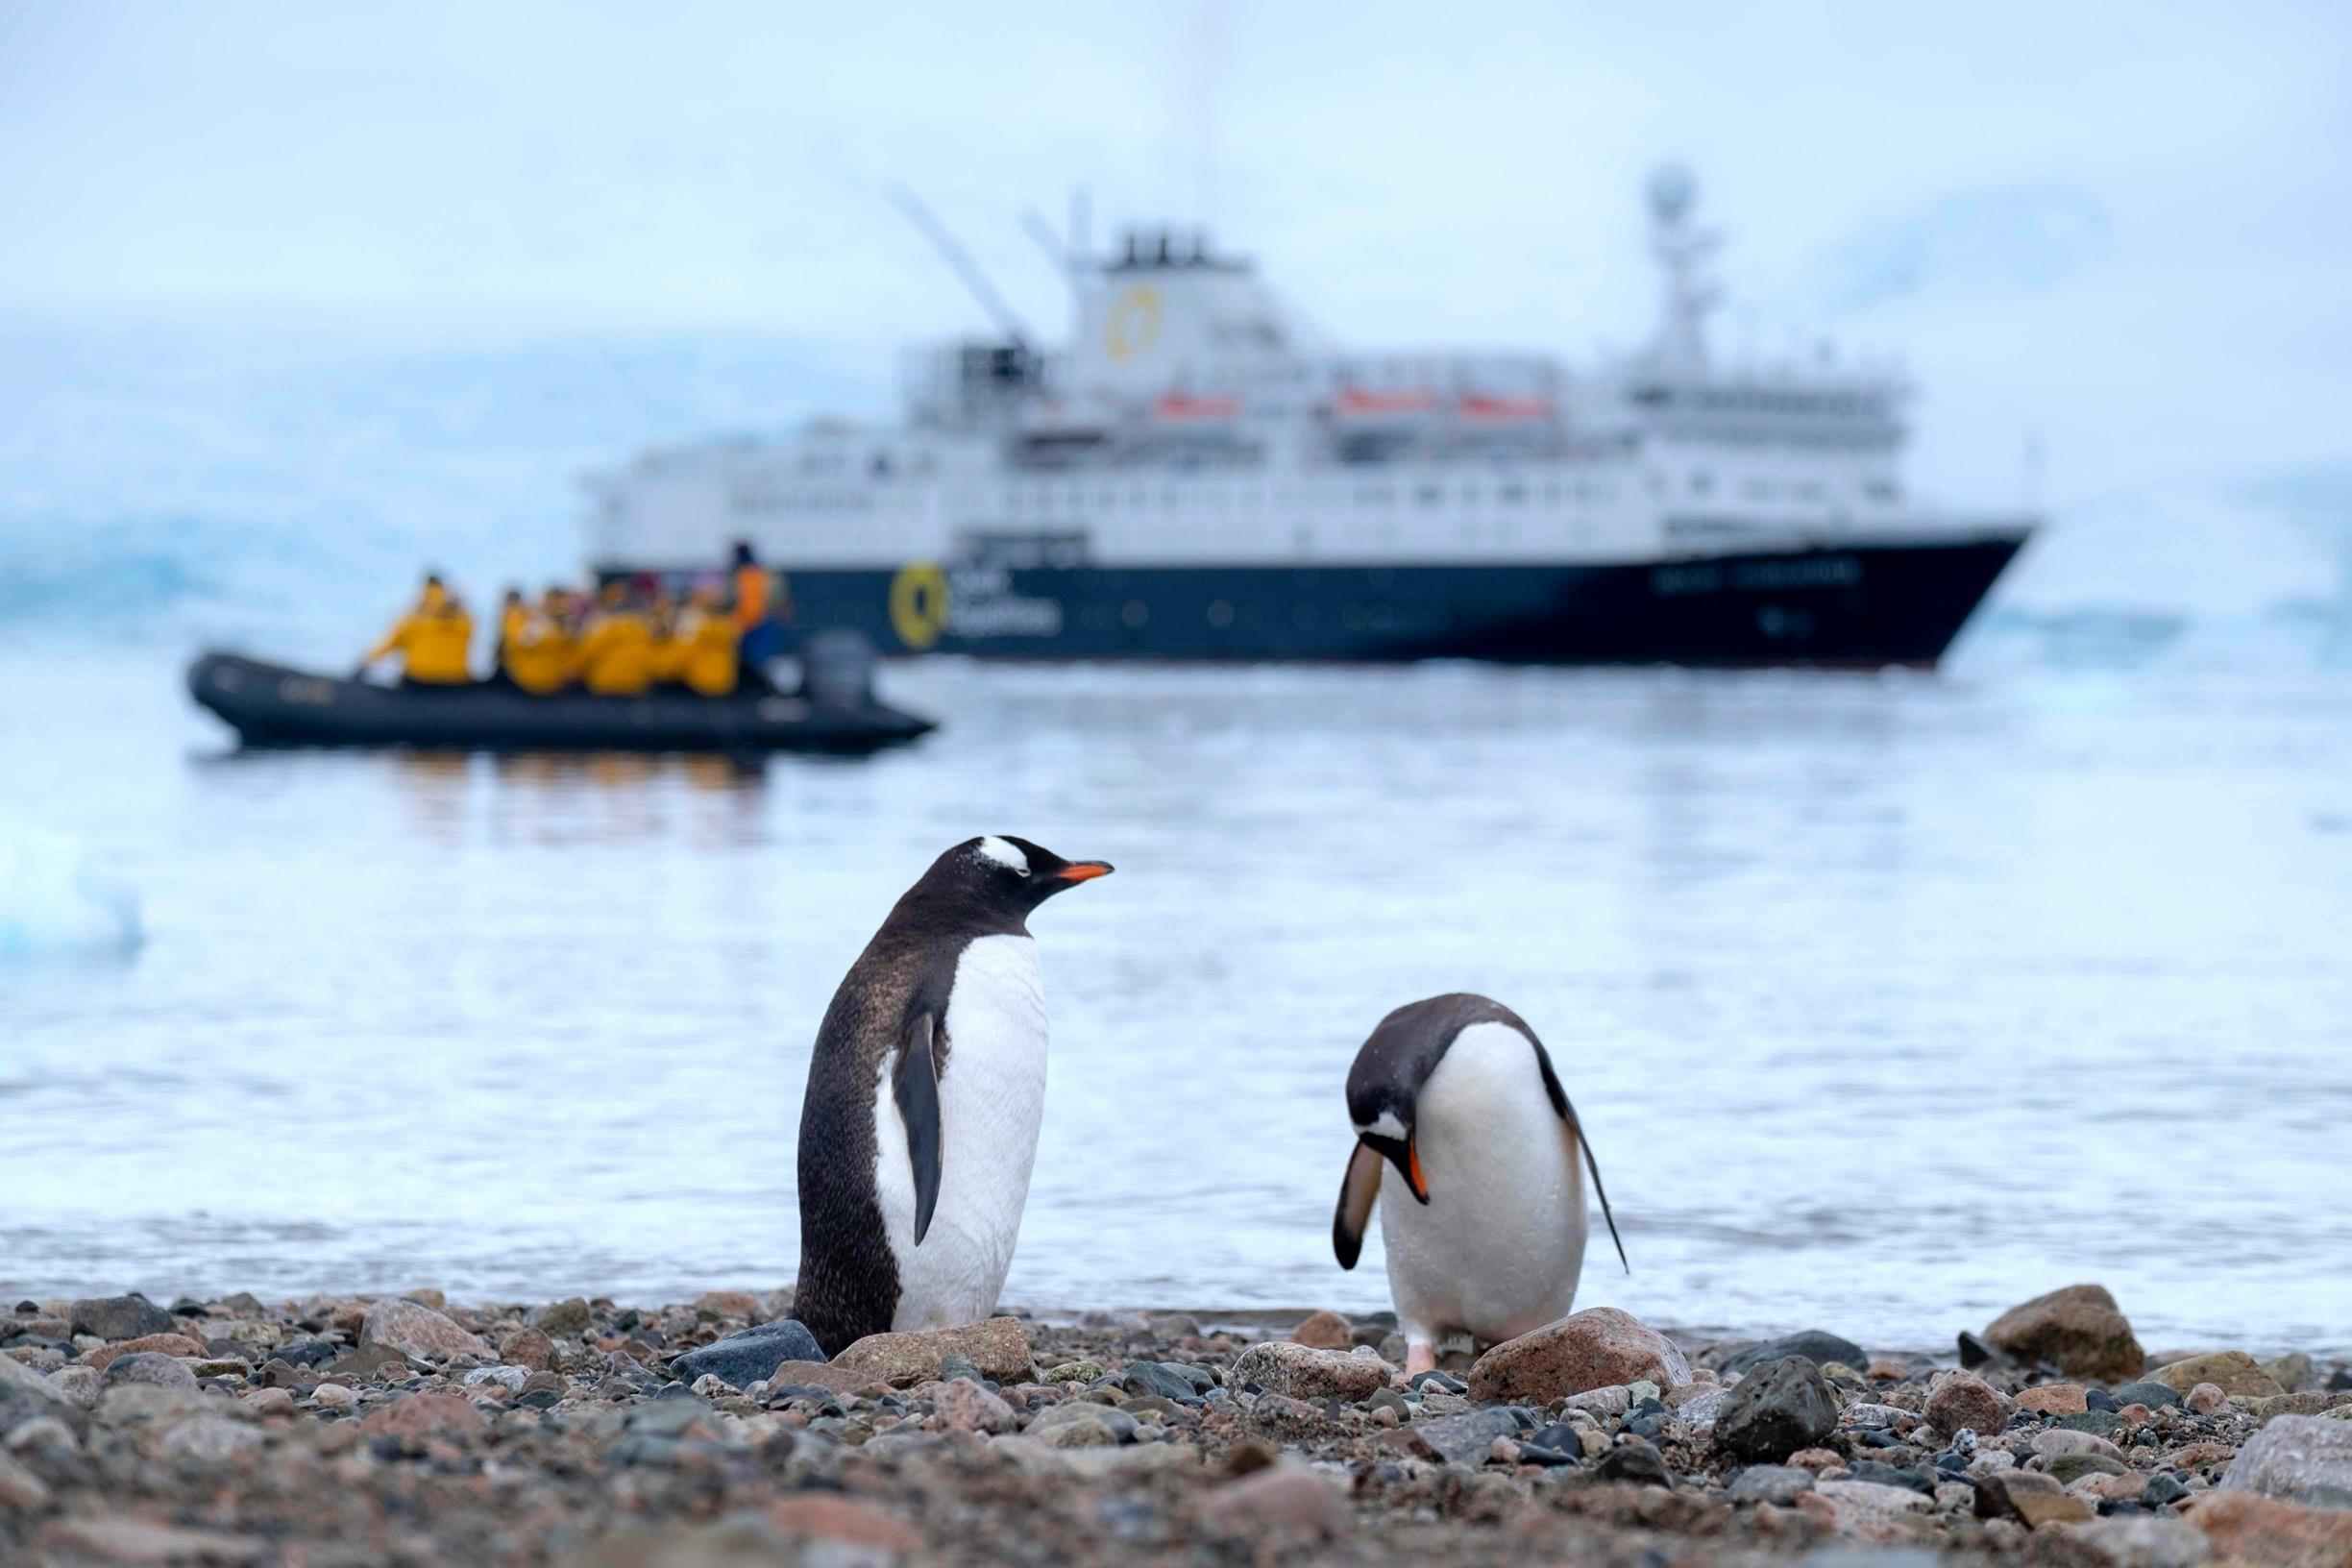 penguins, a zodiac and a cruise ship in Antarctic